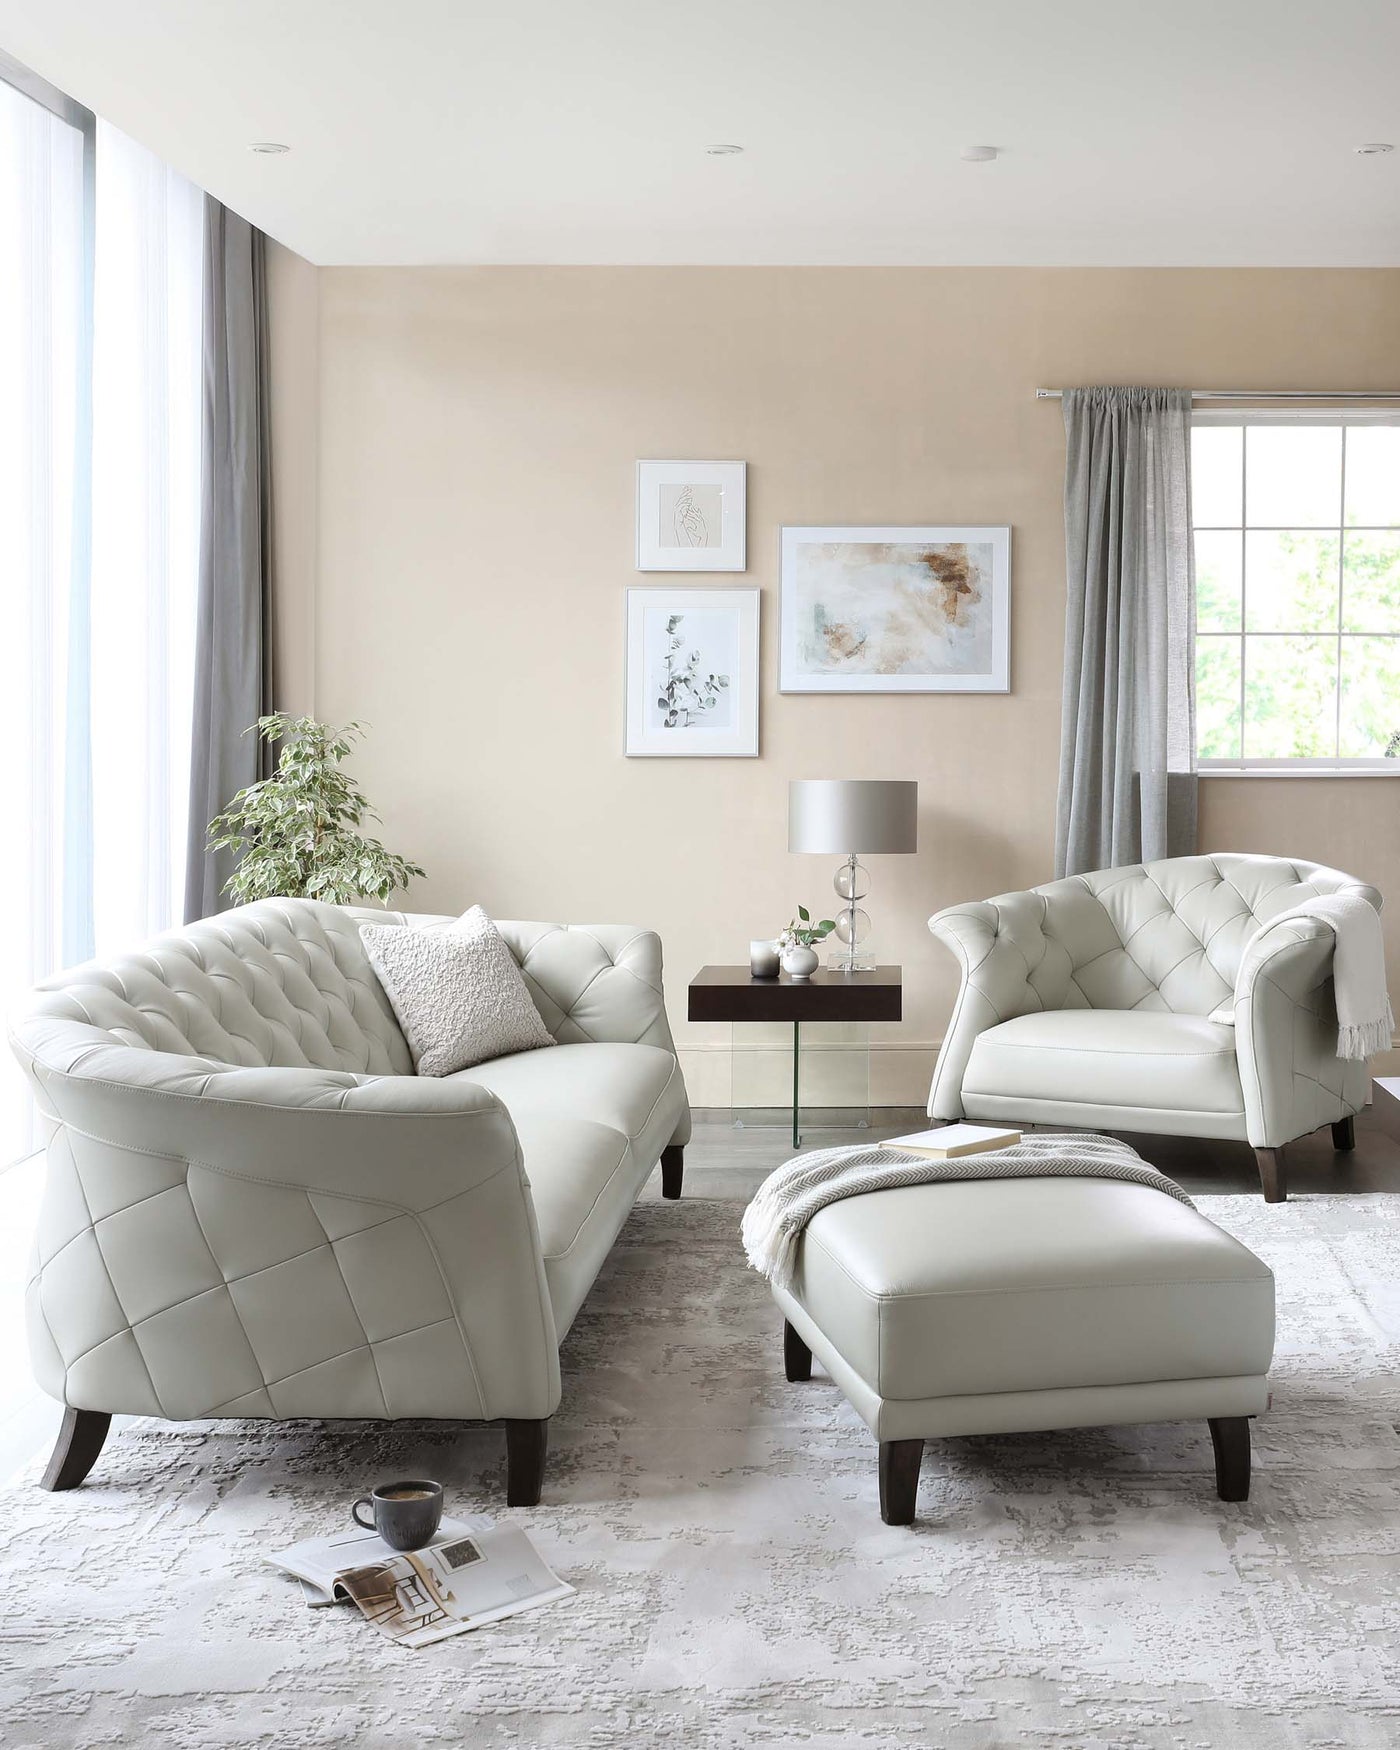 Elegant contemporary living room set featuring a tufted off-white leather sofa and matching armchair, accompanied by a cushioned ottoman on short wooden legs. A sleek dark wood side table with a modern lamp completes the arrangement, all atop a textured grey and white area rug.